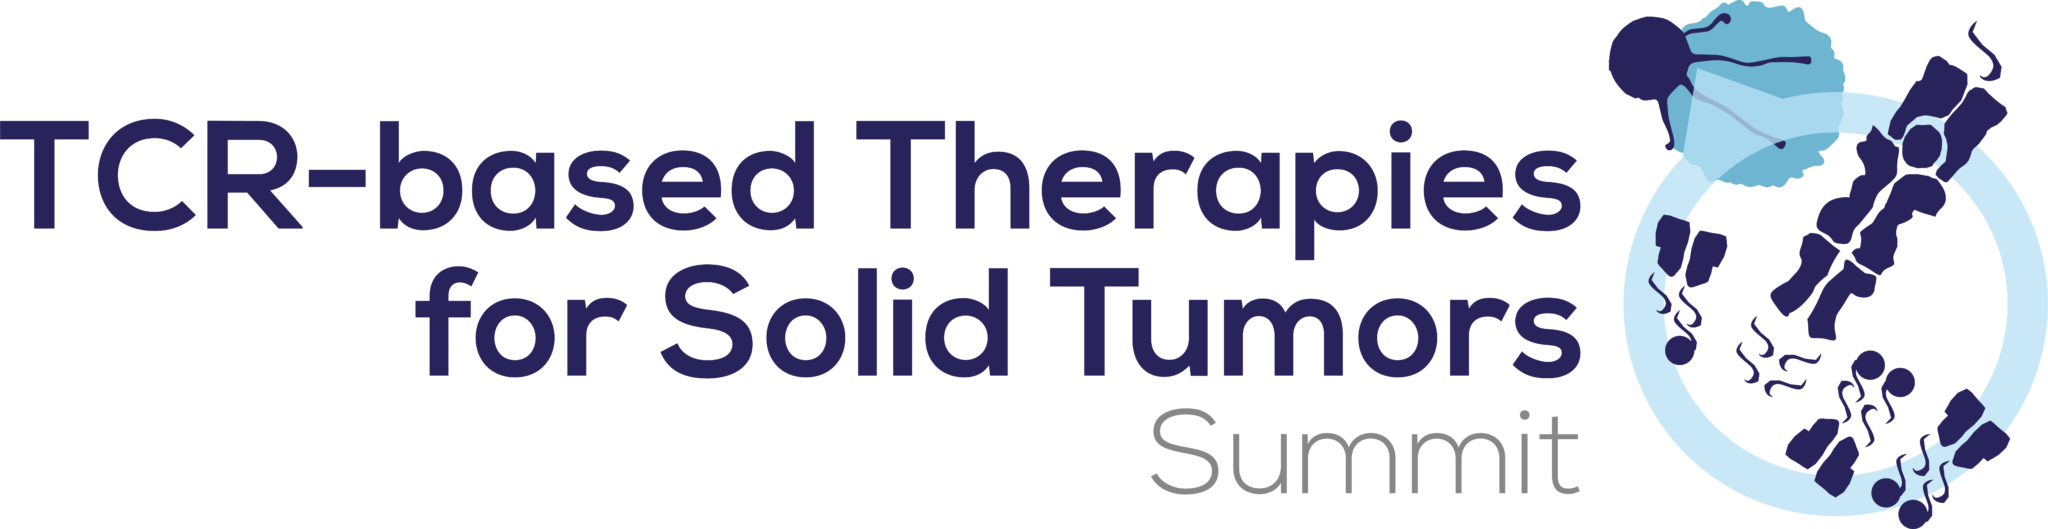 HW211208-TCR-based-Therapies-for-Solid-Tumors-Summit-logo-2048x529